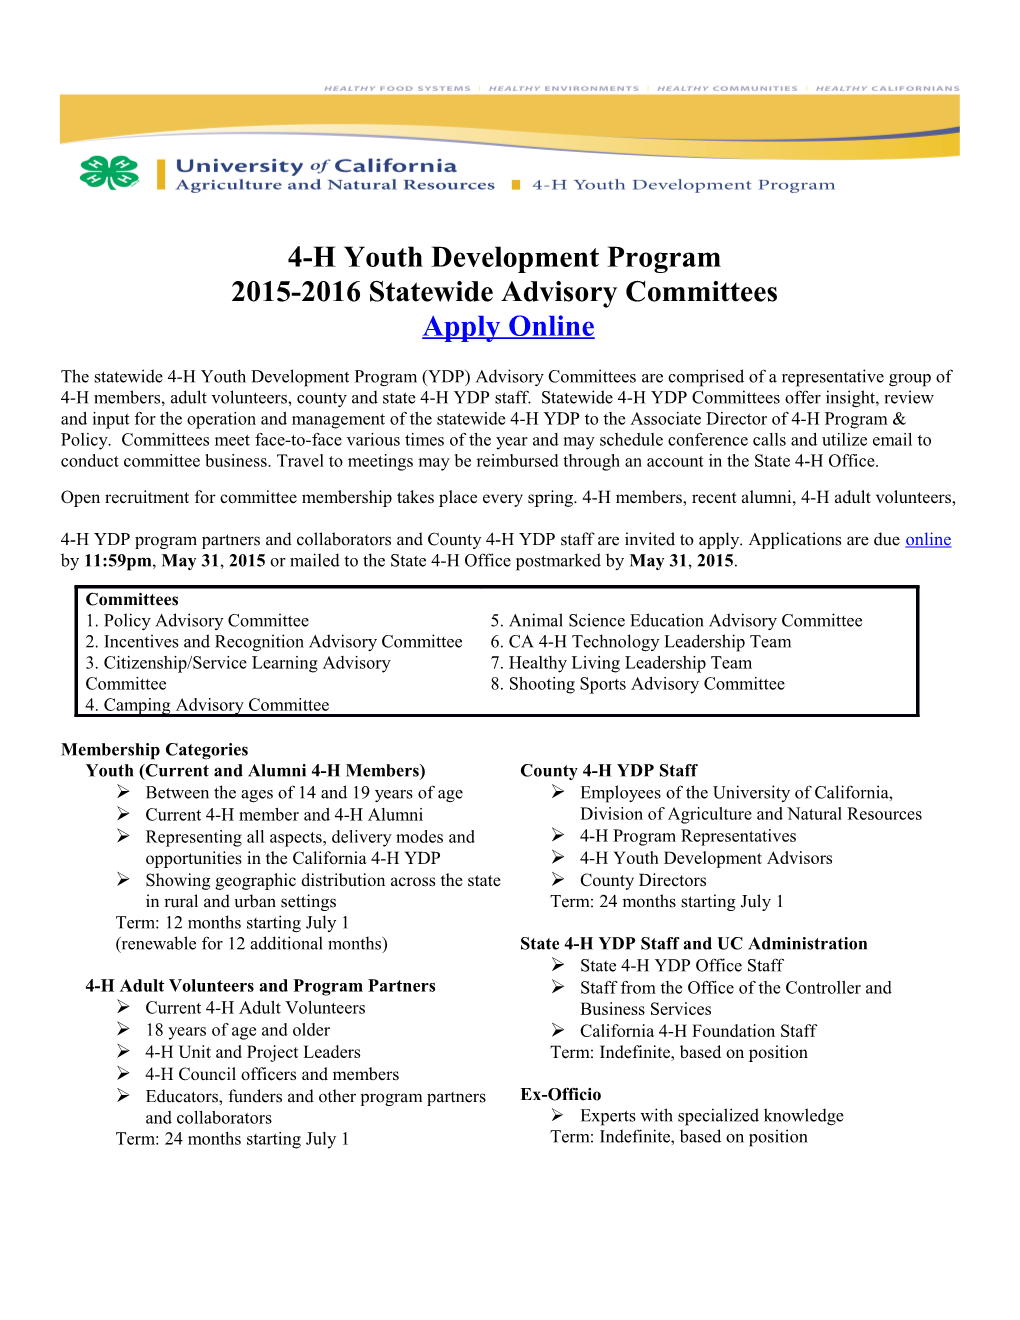 4-H Youth Development Program 2015-2016Statewide Advisory Committees Apply Online